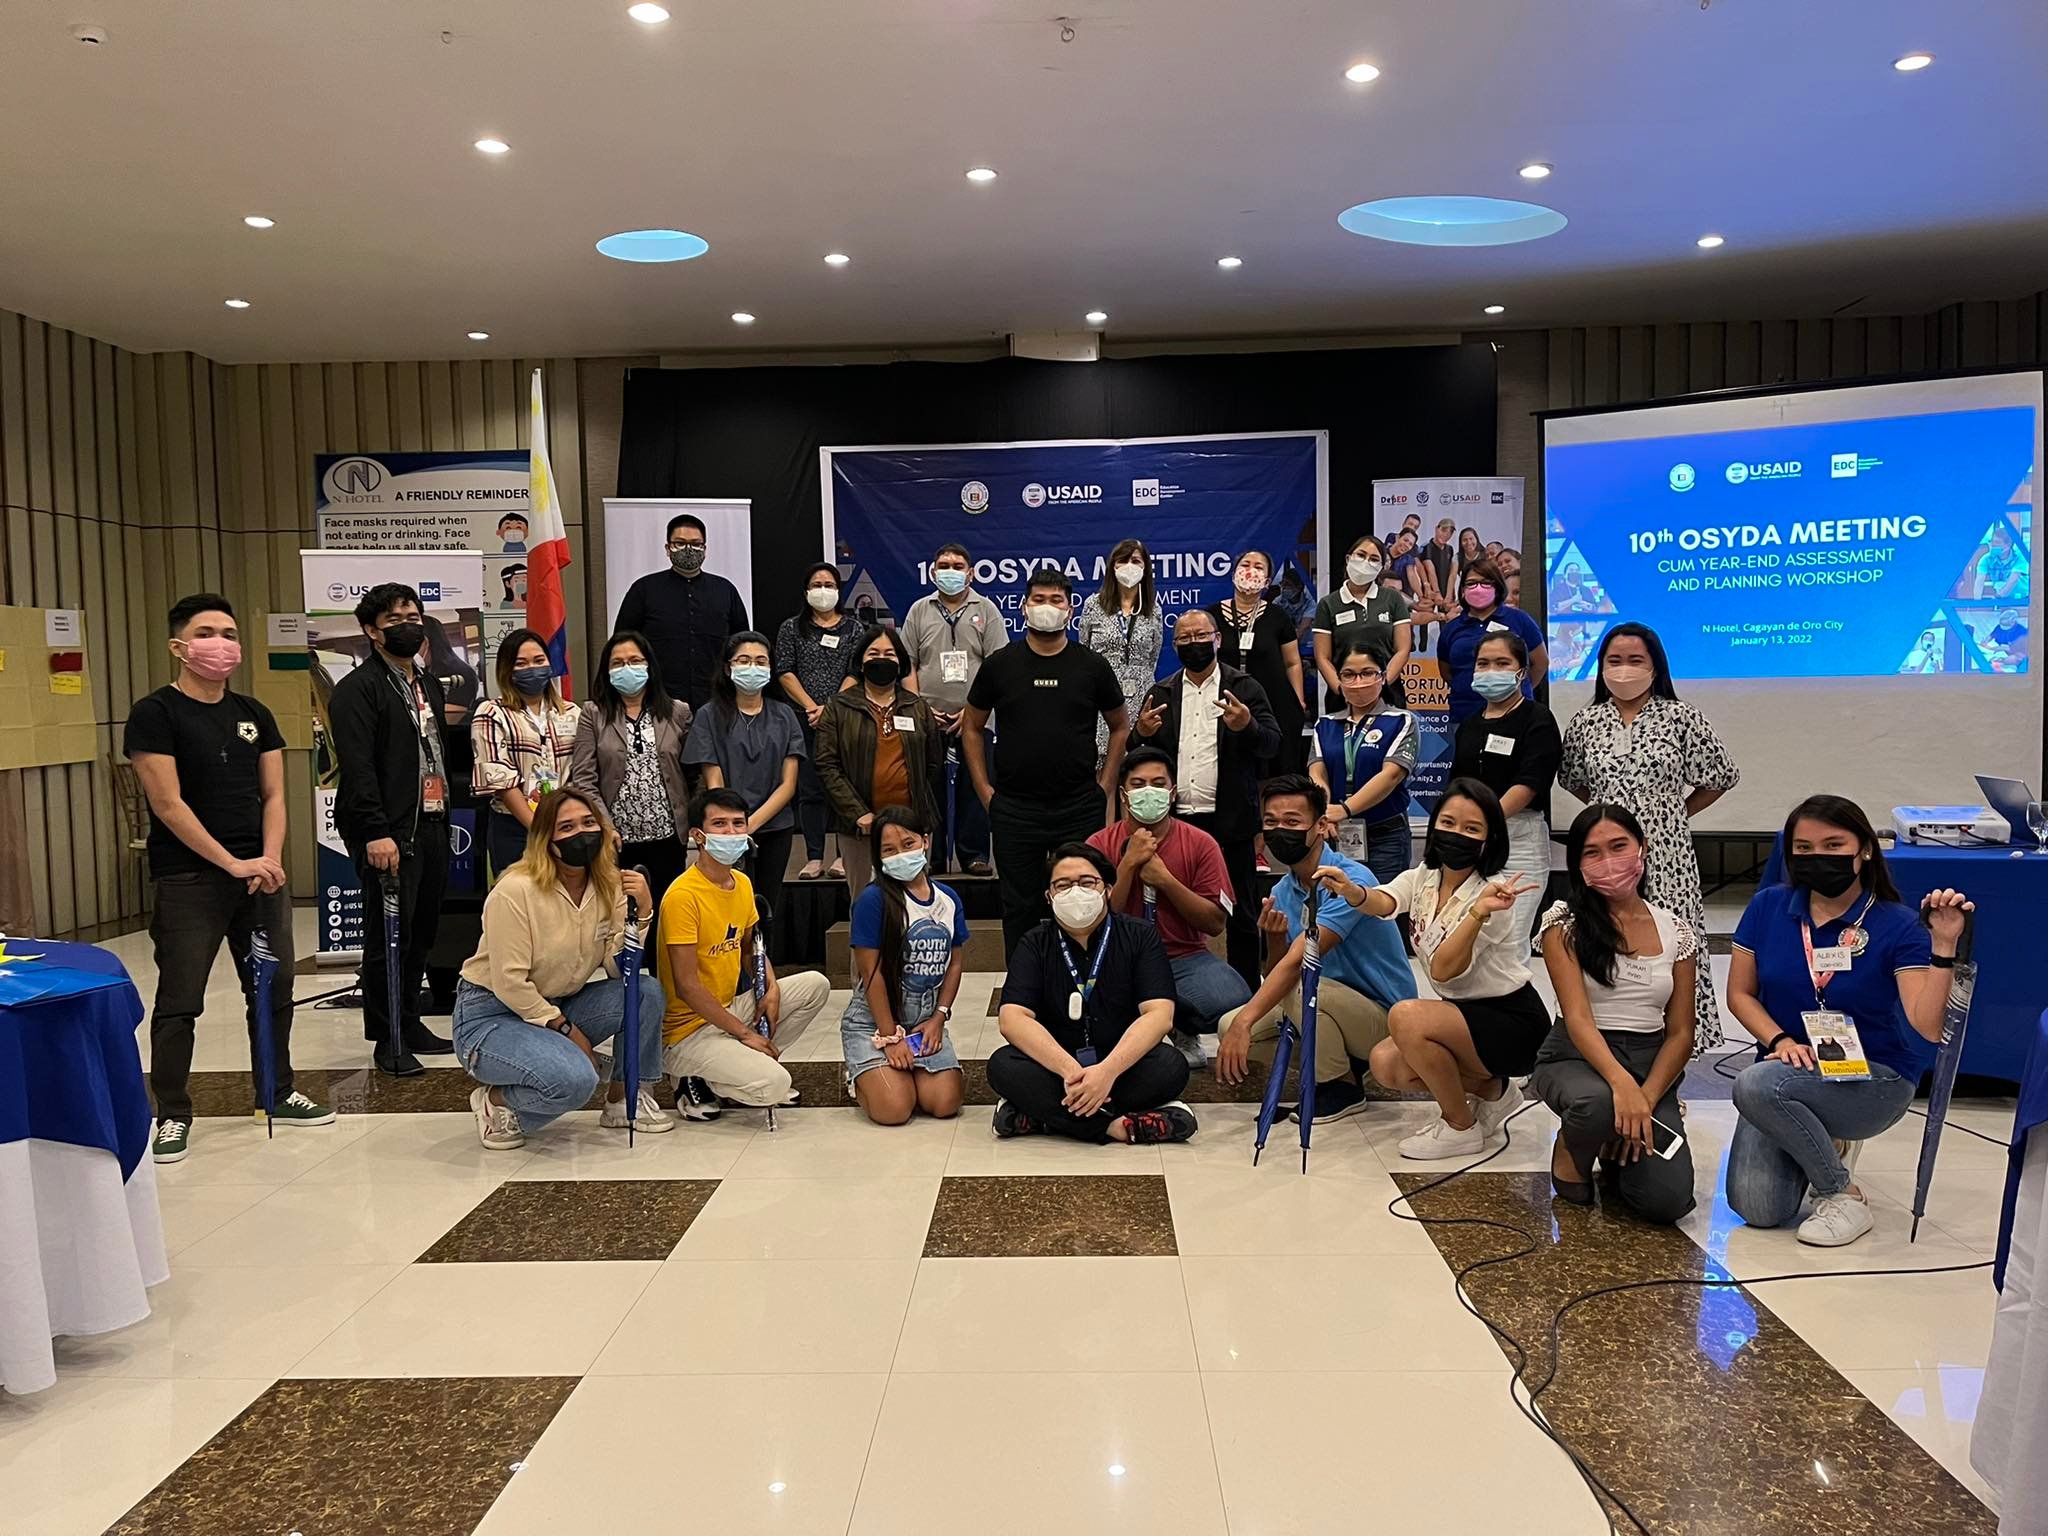 Participants of the Out-of-School Youth Development Alliance (OSYDA) of Cagayan de Oro City posing for a photo opportunity after the one-day 10th Alliance Meeting and Year-end Assessment cum Planning Workshop last January 13 at N Hotel, Cagayan de Oro City. (OSYDA File Photo)